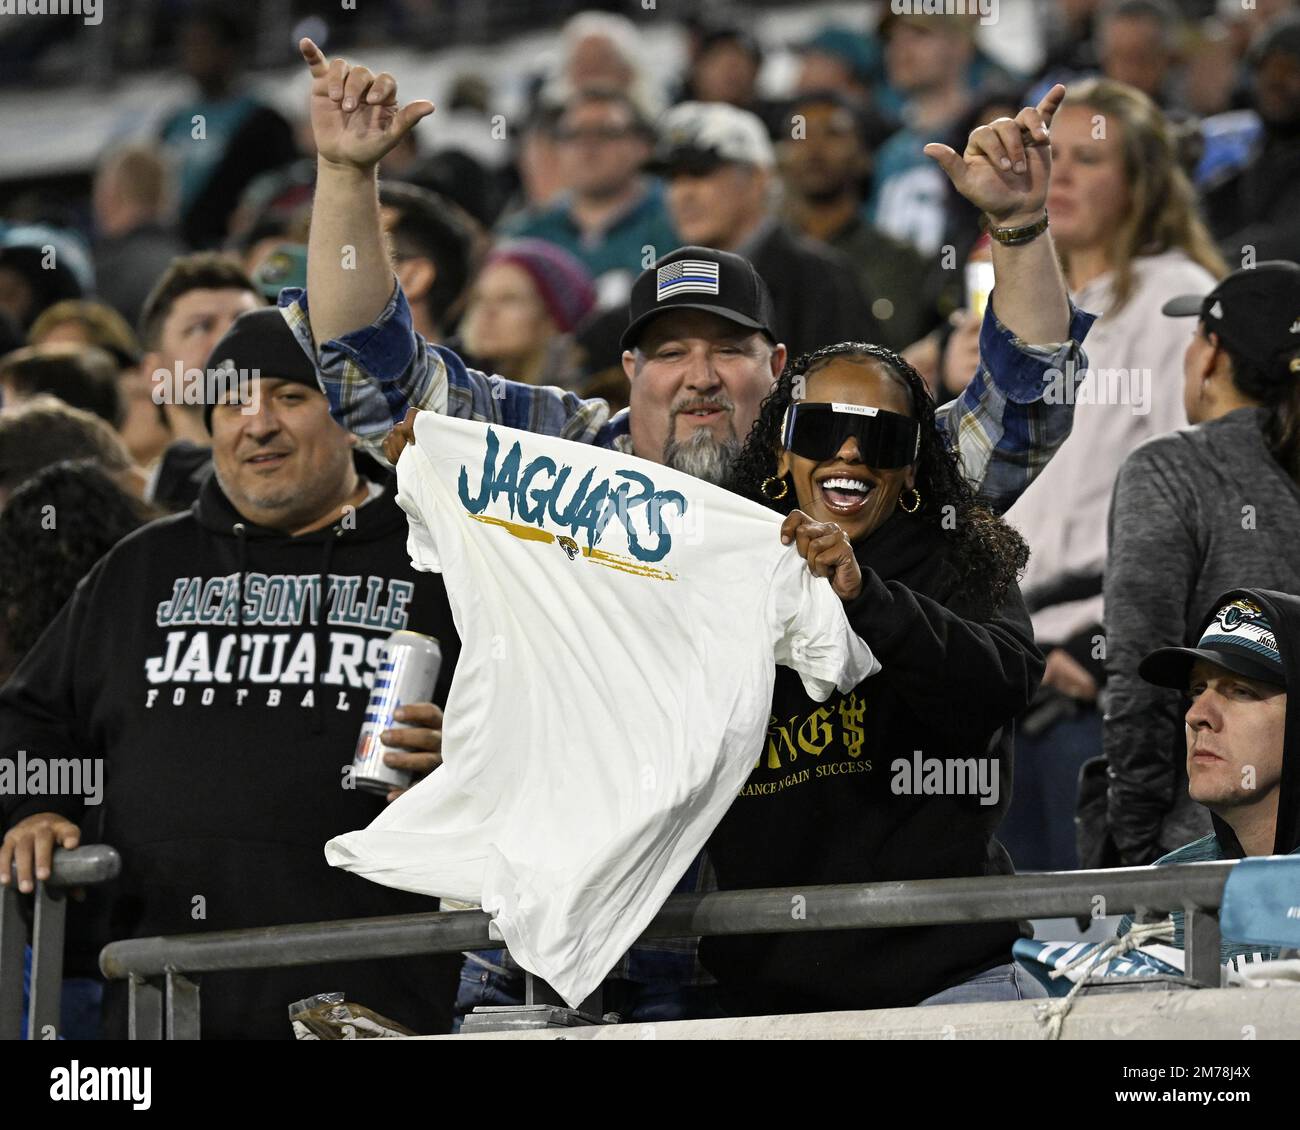 Jacksonville, United States. 07th Jan, 2023. Jaguars fans celebrate as the Titans compete against the Jaguars for the final game of the NFL 2022/23 season at the TIAA Bank Field in Jacksonville, Florida on Saturday, January 7, 2023. The Jaguars defeated the Titans 20-16 moving them into first place of the NFL Southern Conference. Photo by Joe Marino/UPI. Credit: UPI/Alamy Live News Stock Photo